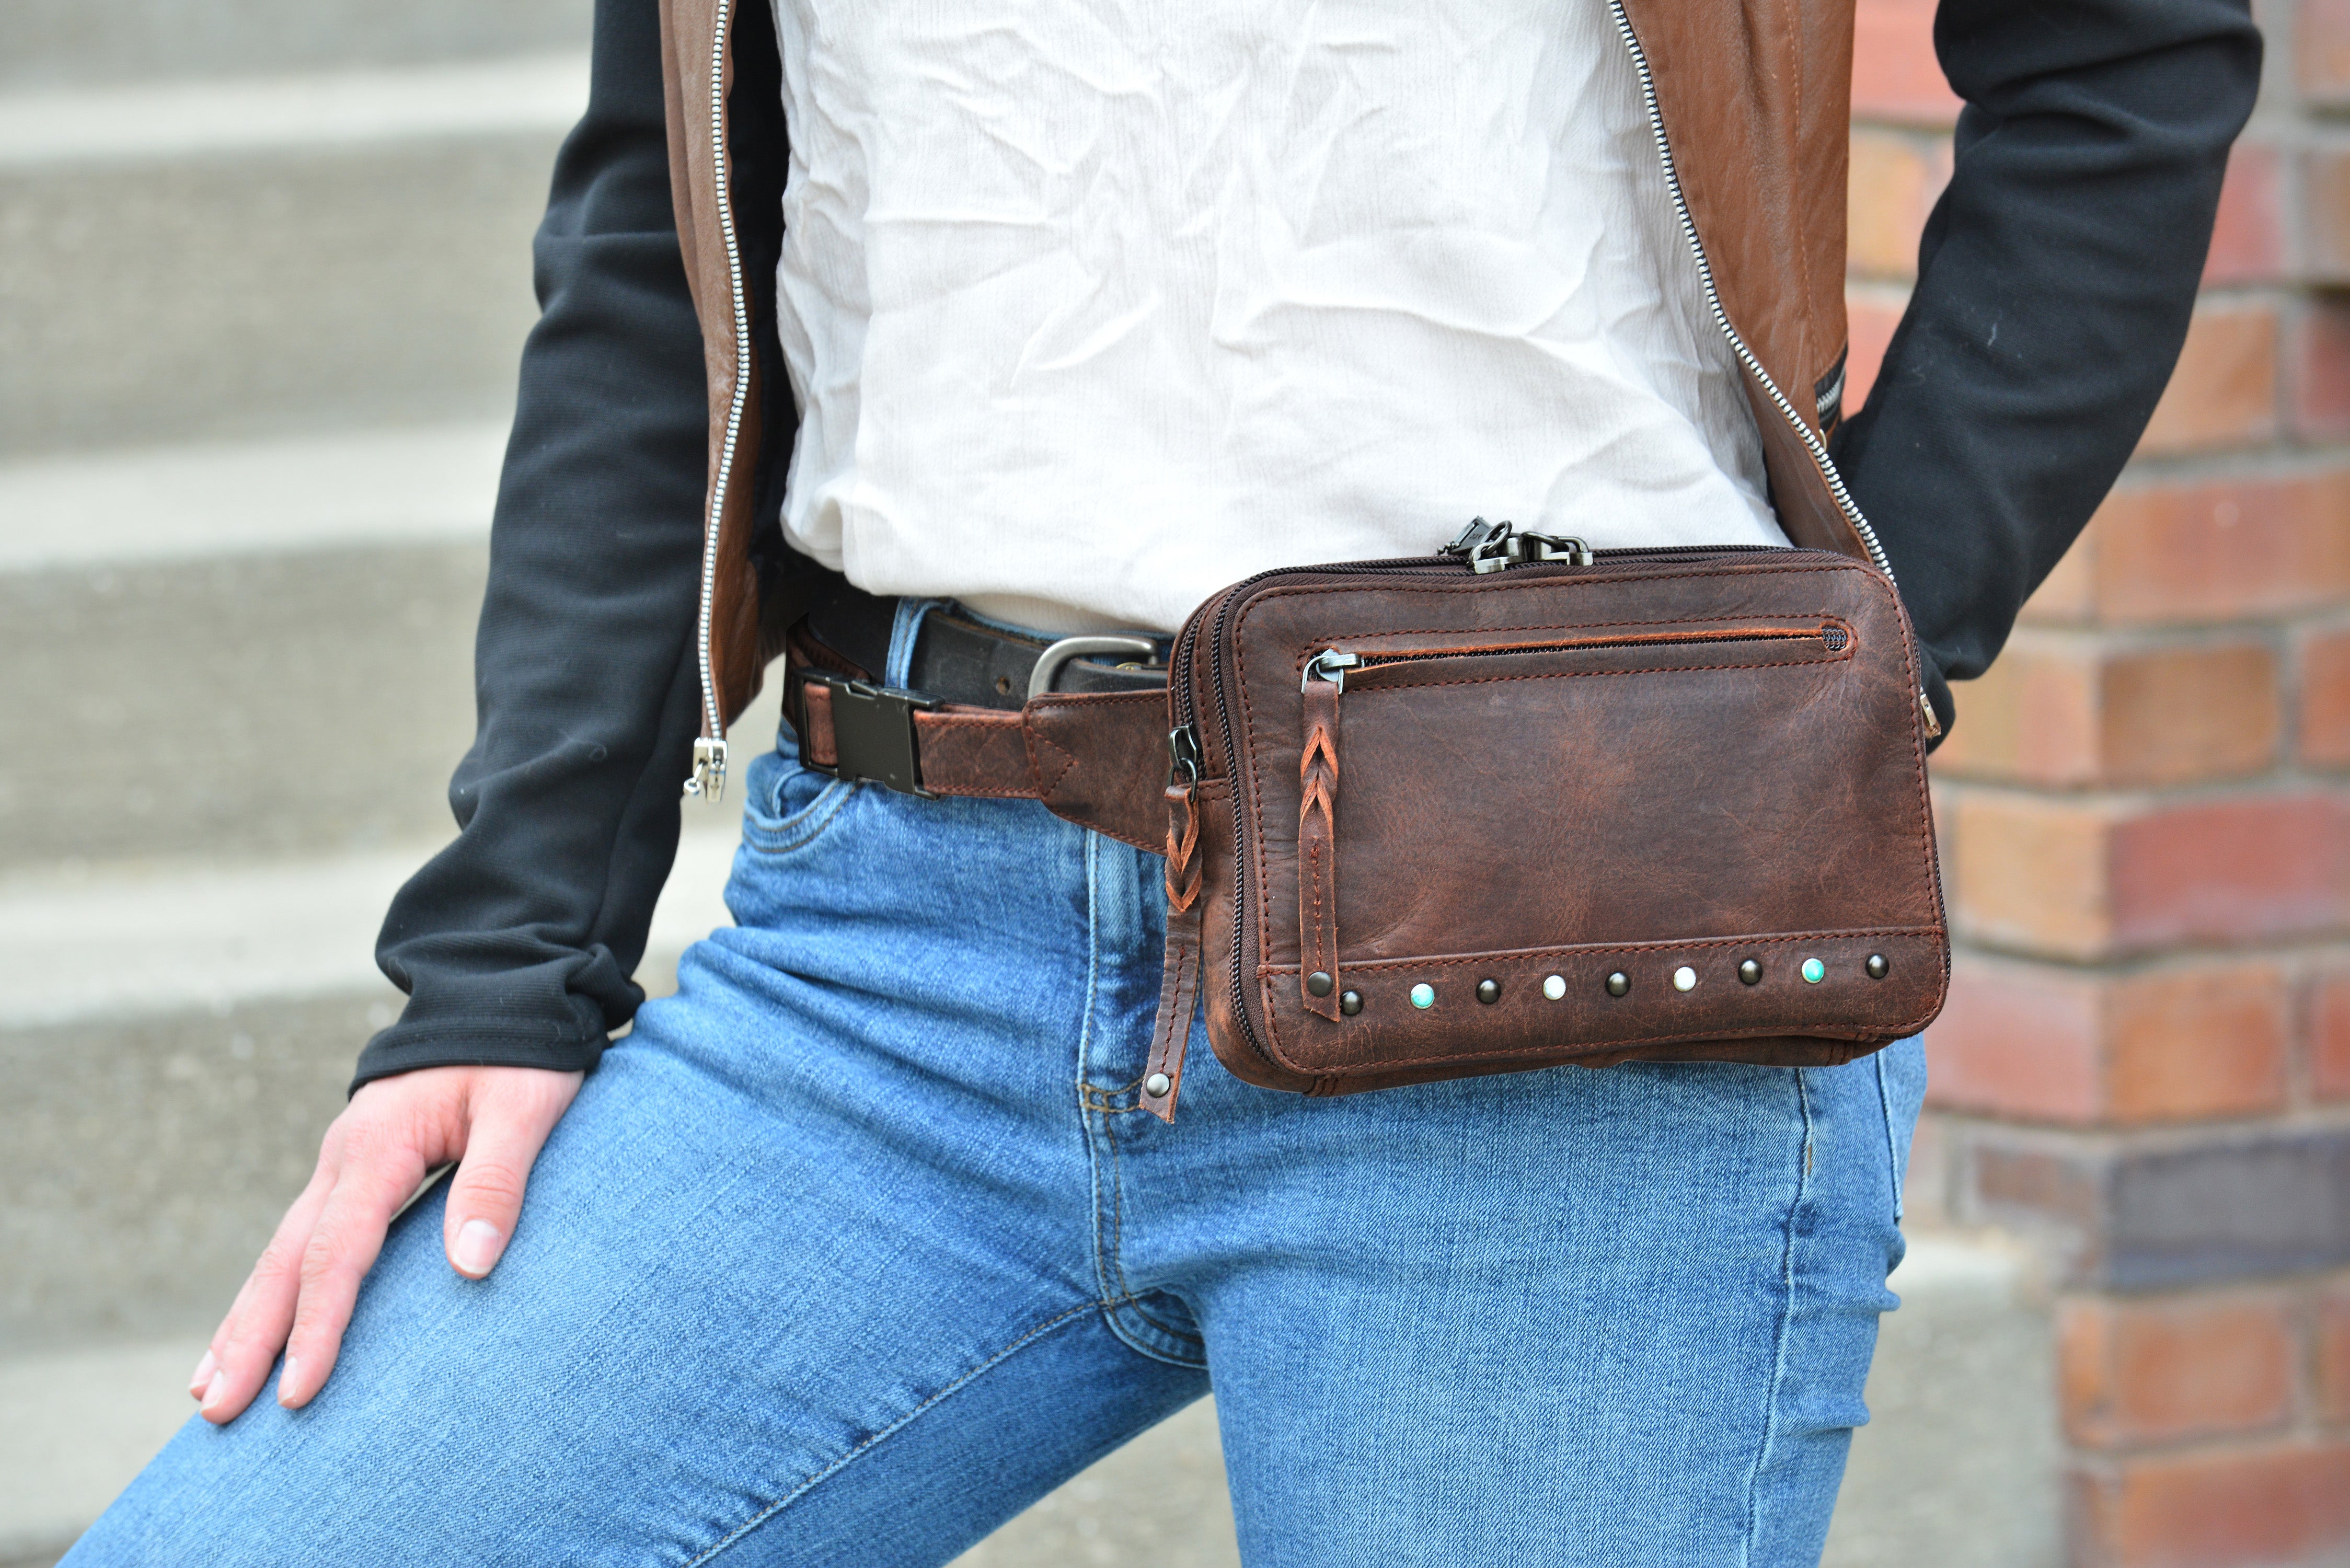 Kailey Concealed Carry Leather Purse Pack